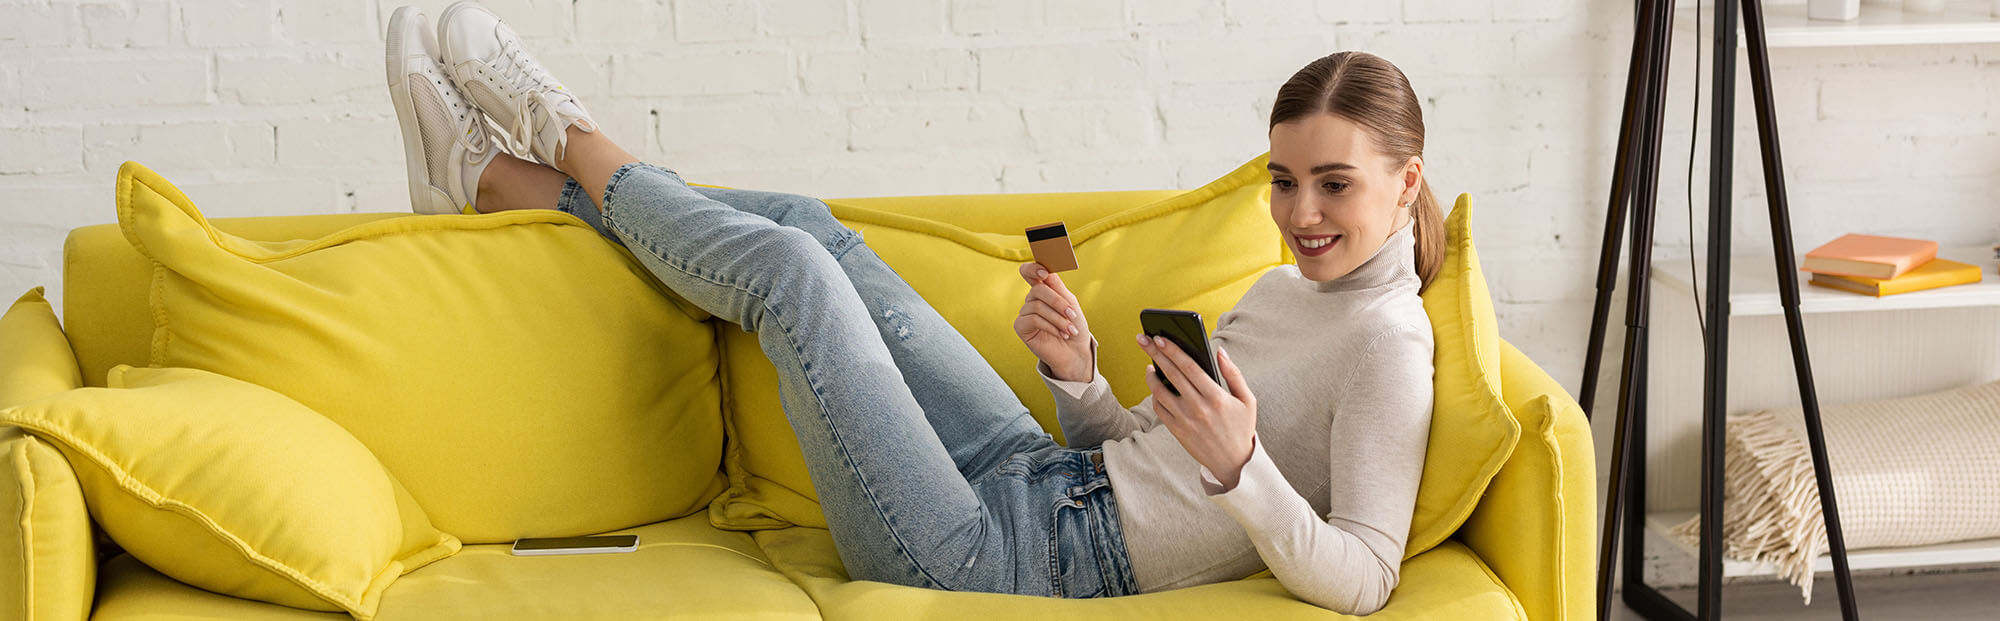 A young woman is lying on her couch enjoying shopping with her phone and credit card.